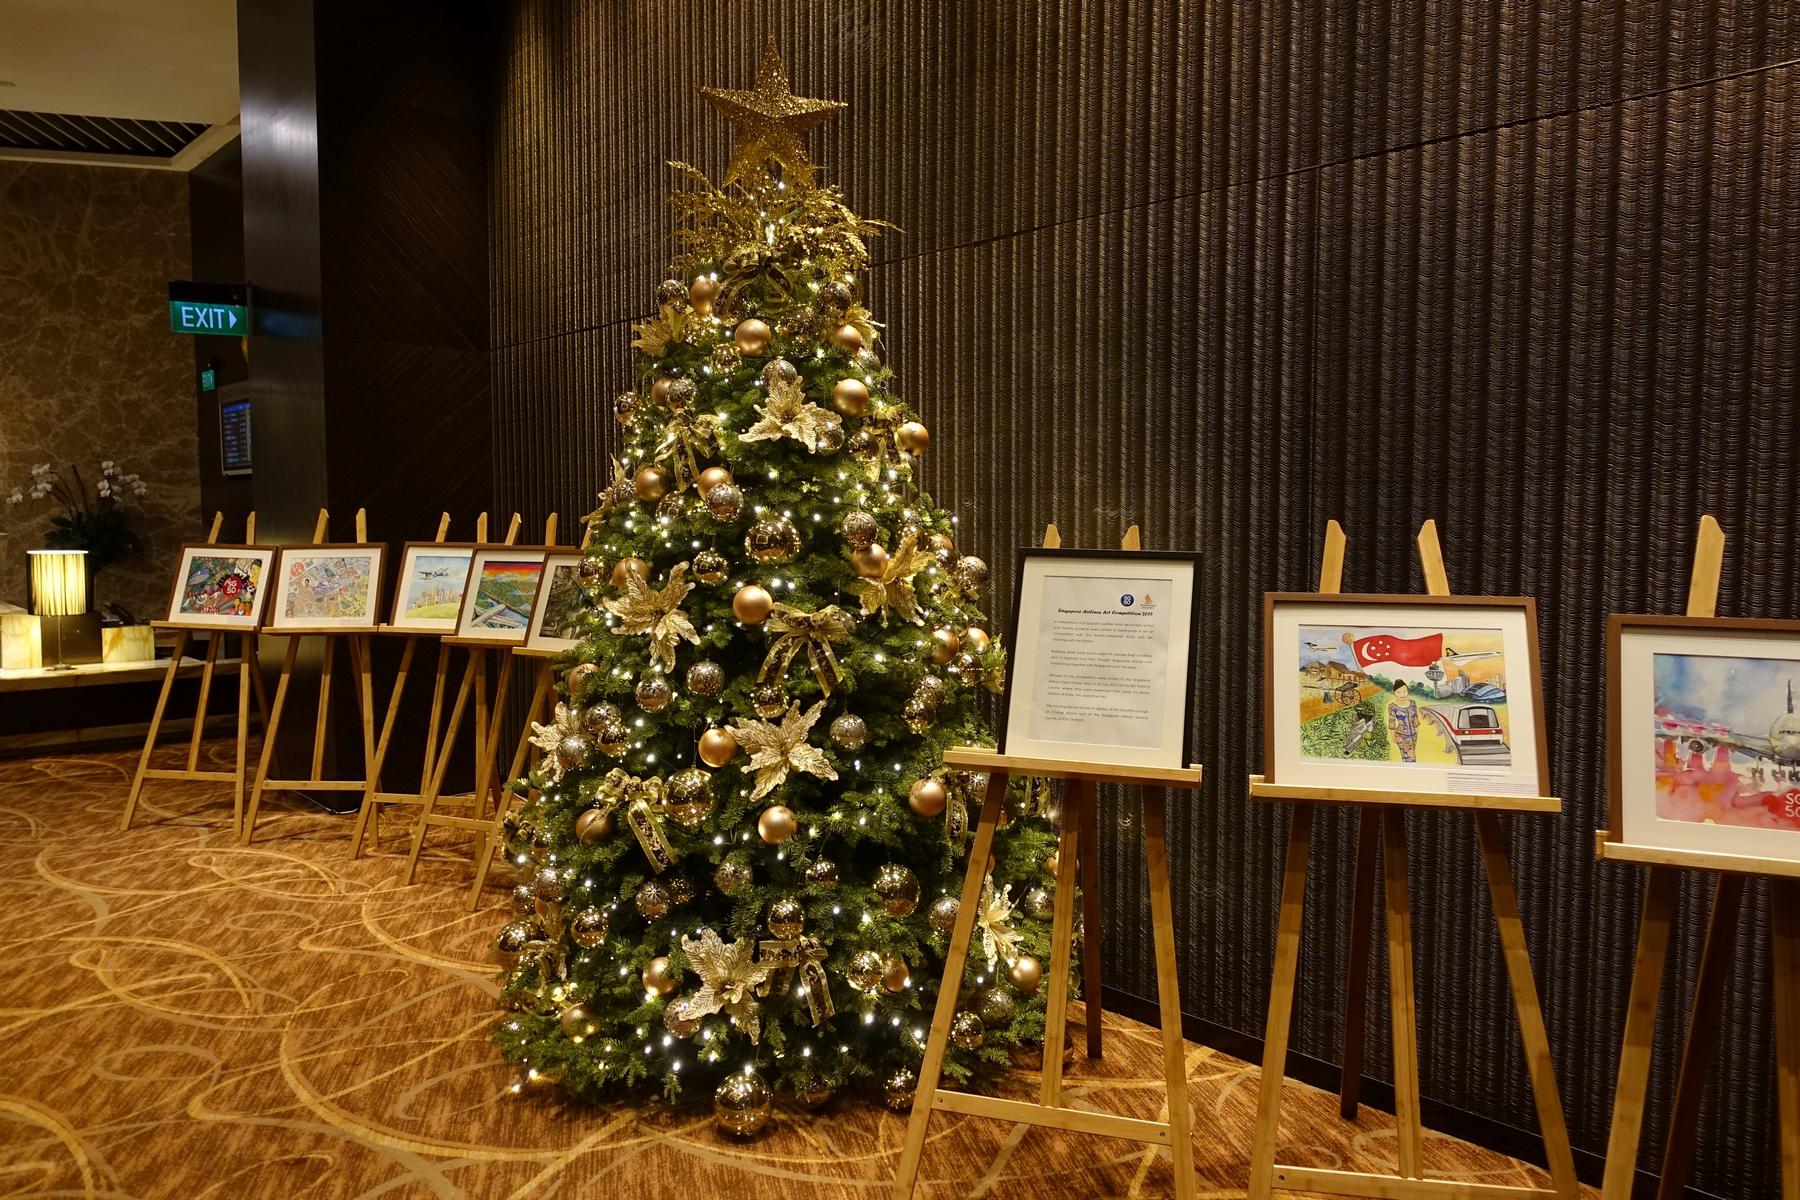 At entrance of the Private Room was a huge lit up Christmas tree surround with various paintings drawn by young Singaporean students